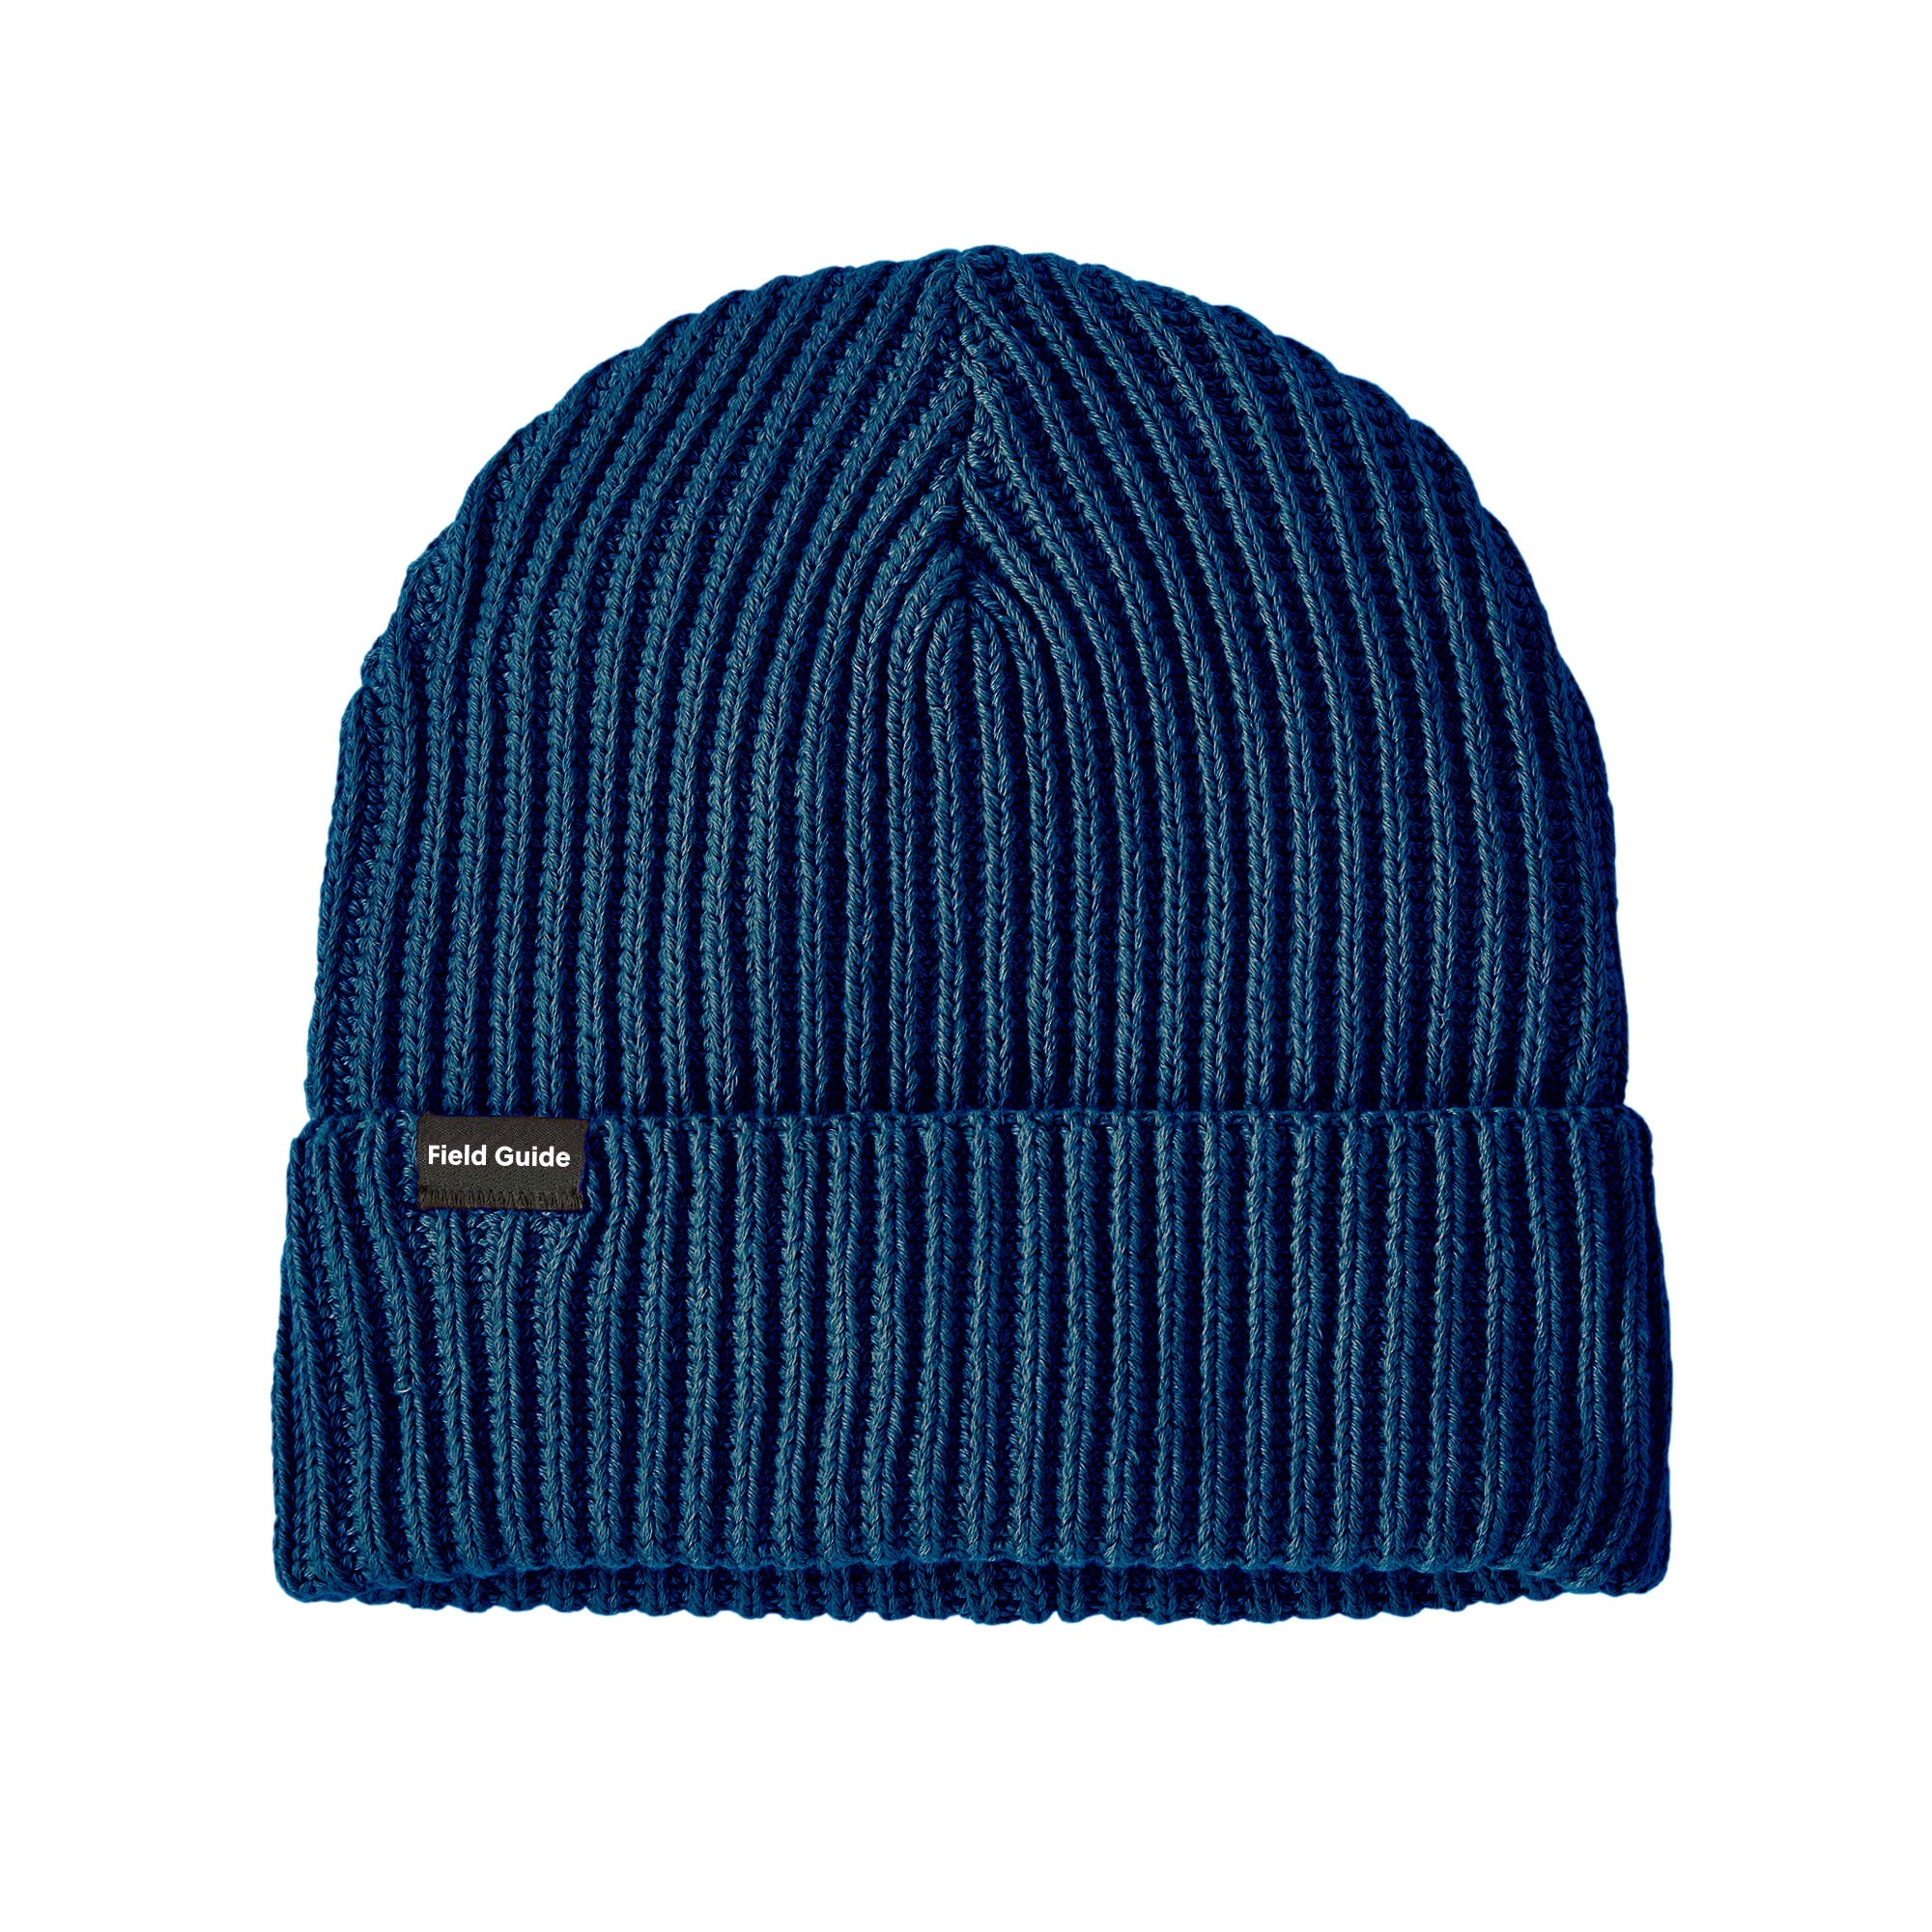 Rolled Fisherman's (Fisherperson's) Beanie